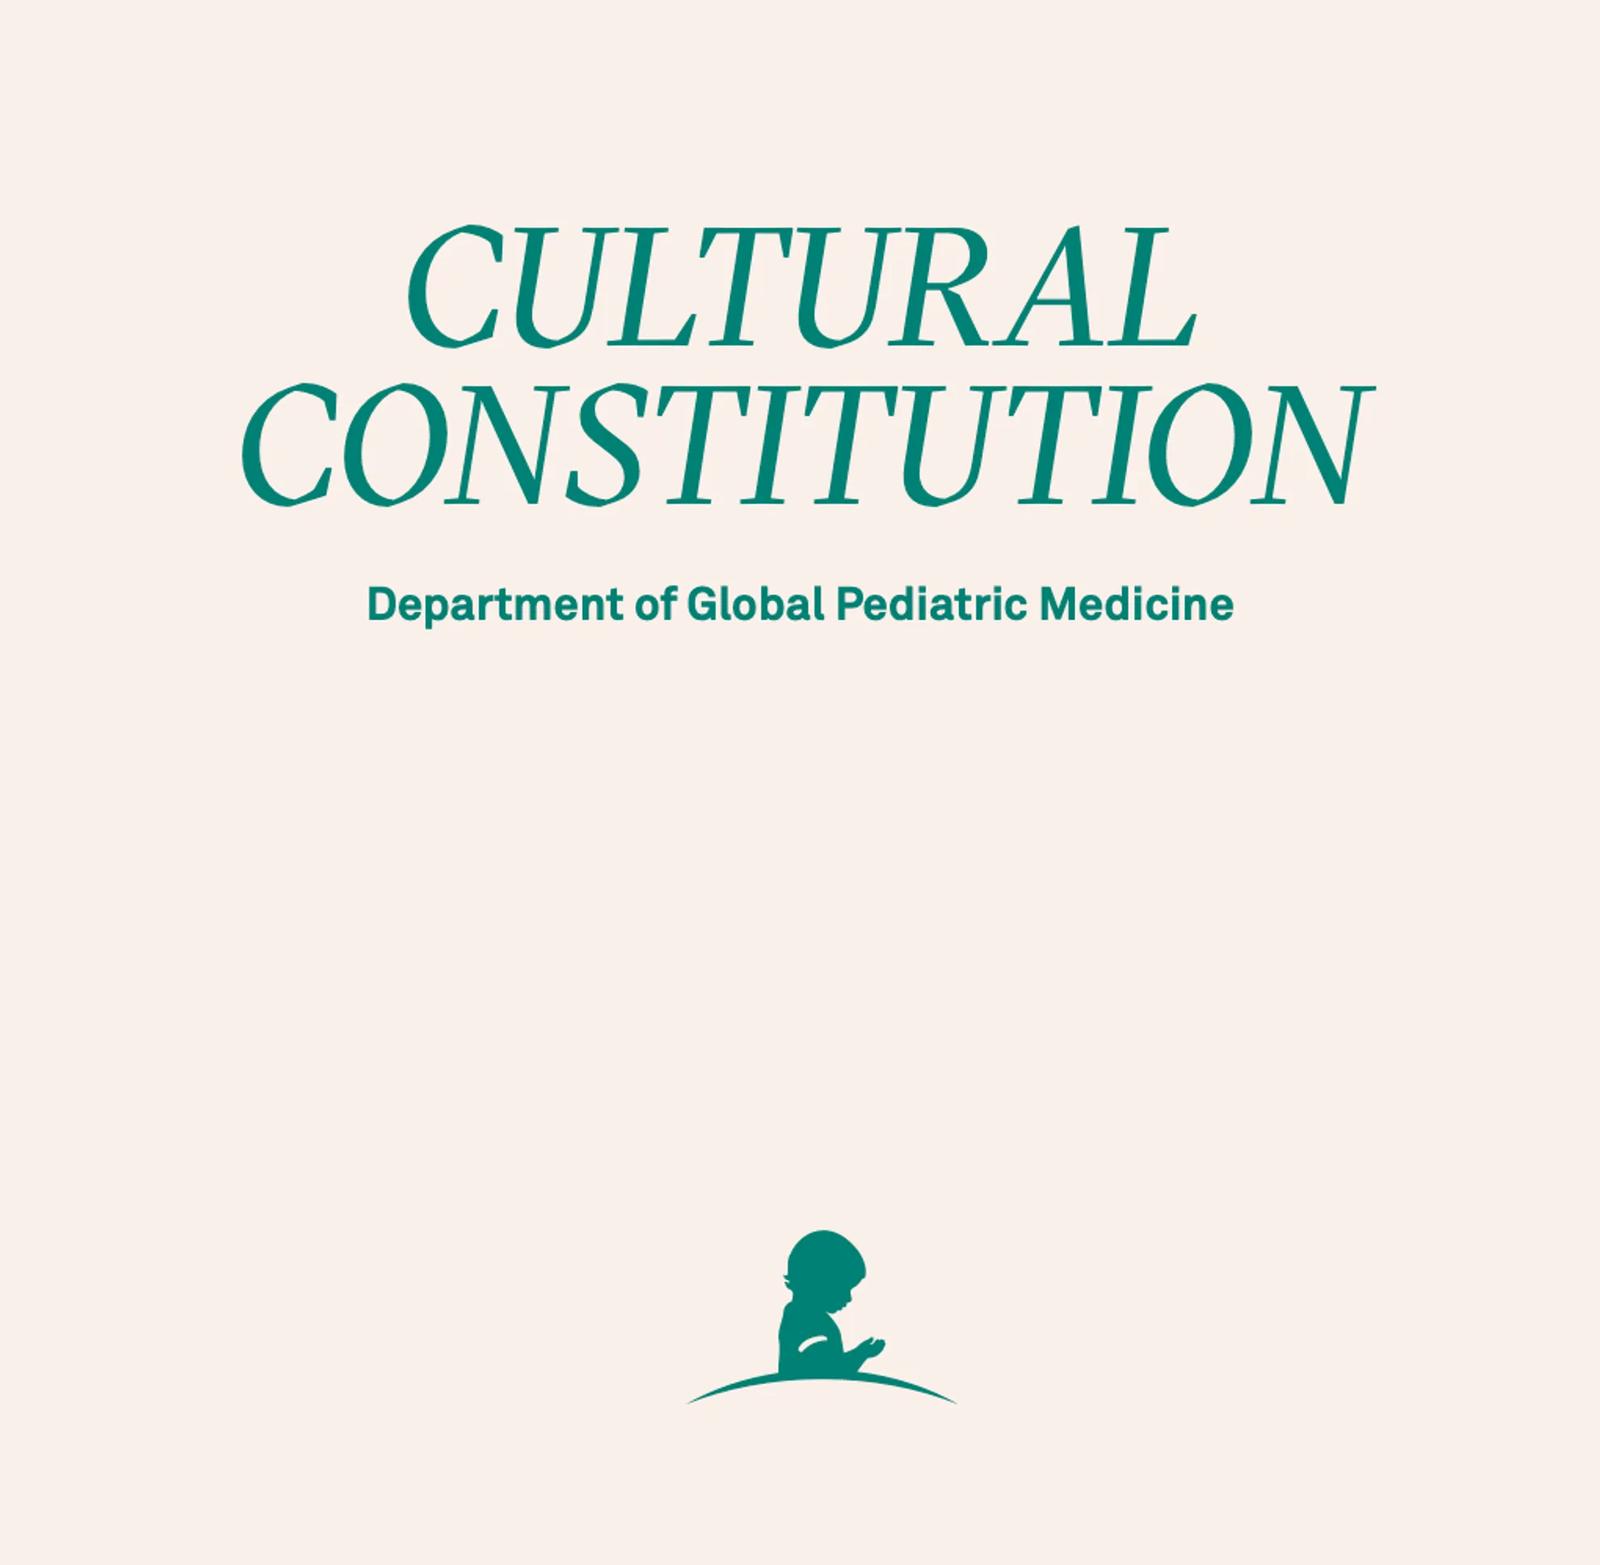 Cultural Constitution for St. Jude